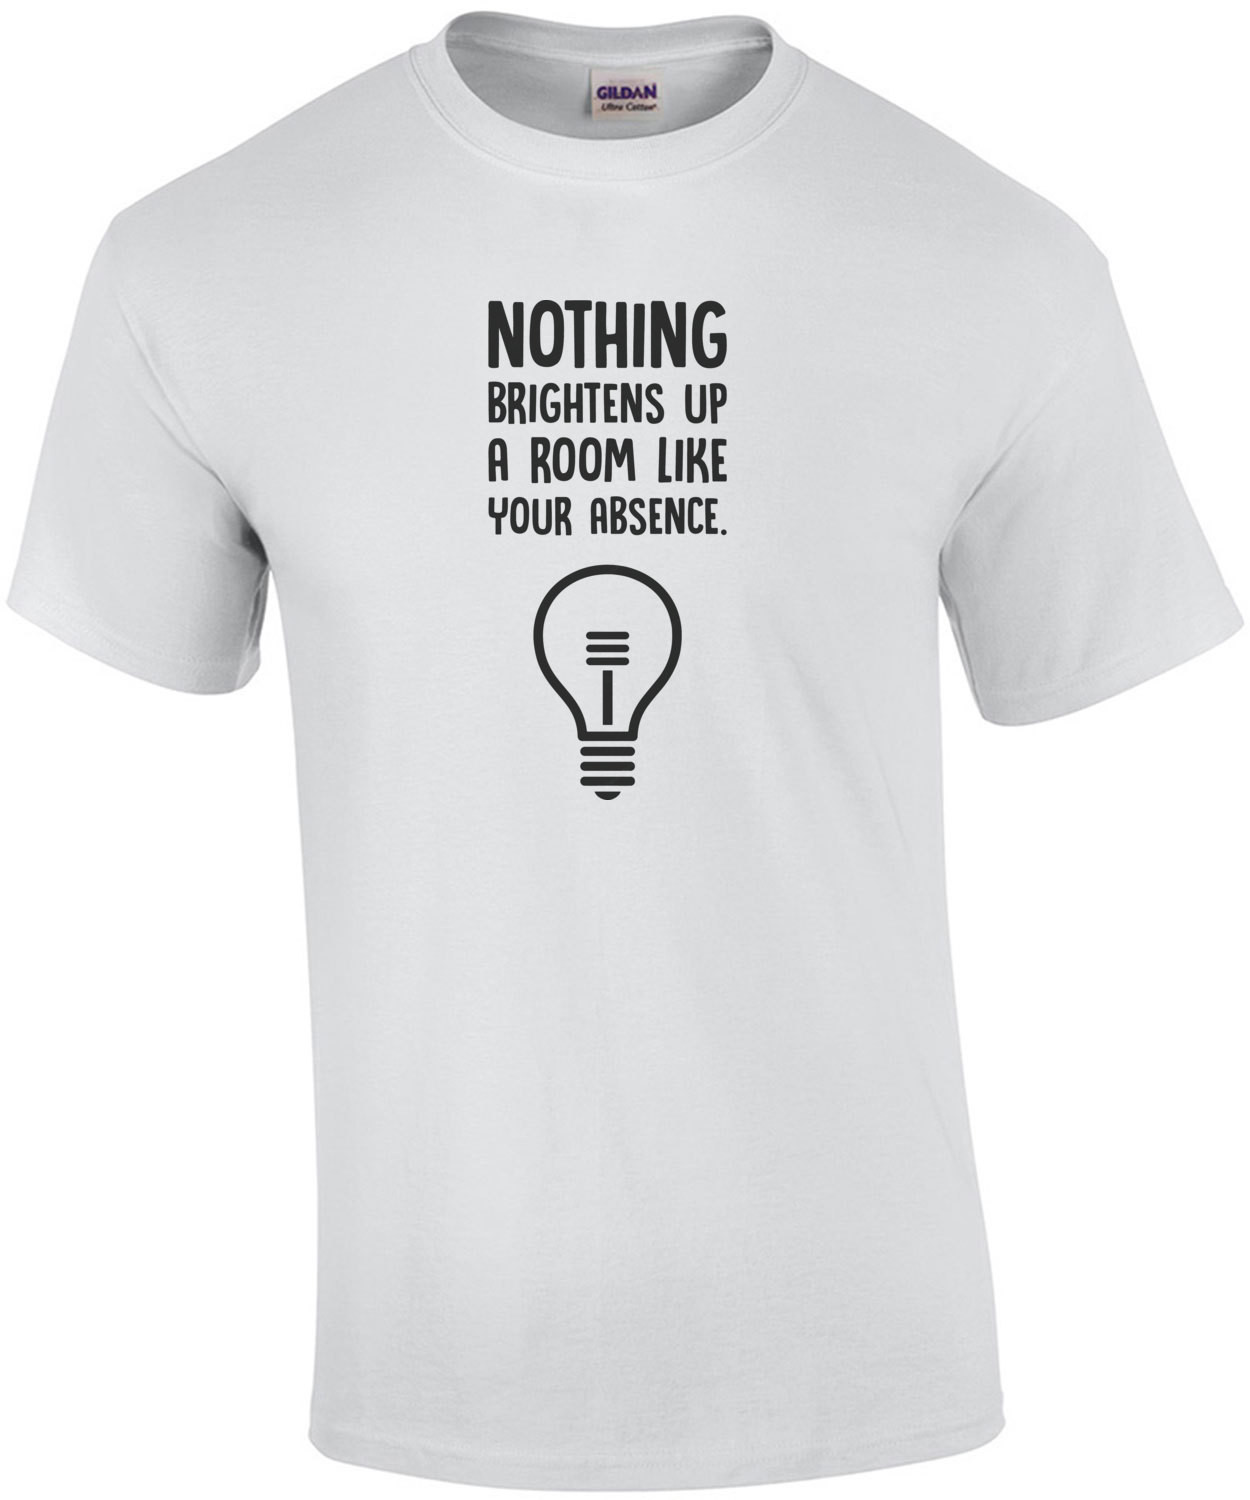 Nothing brightens up a room like your absense. Insult T-Shirt